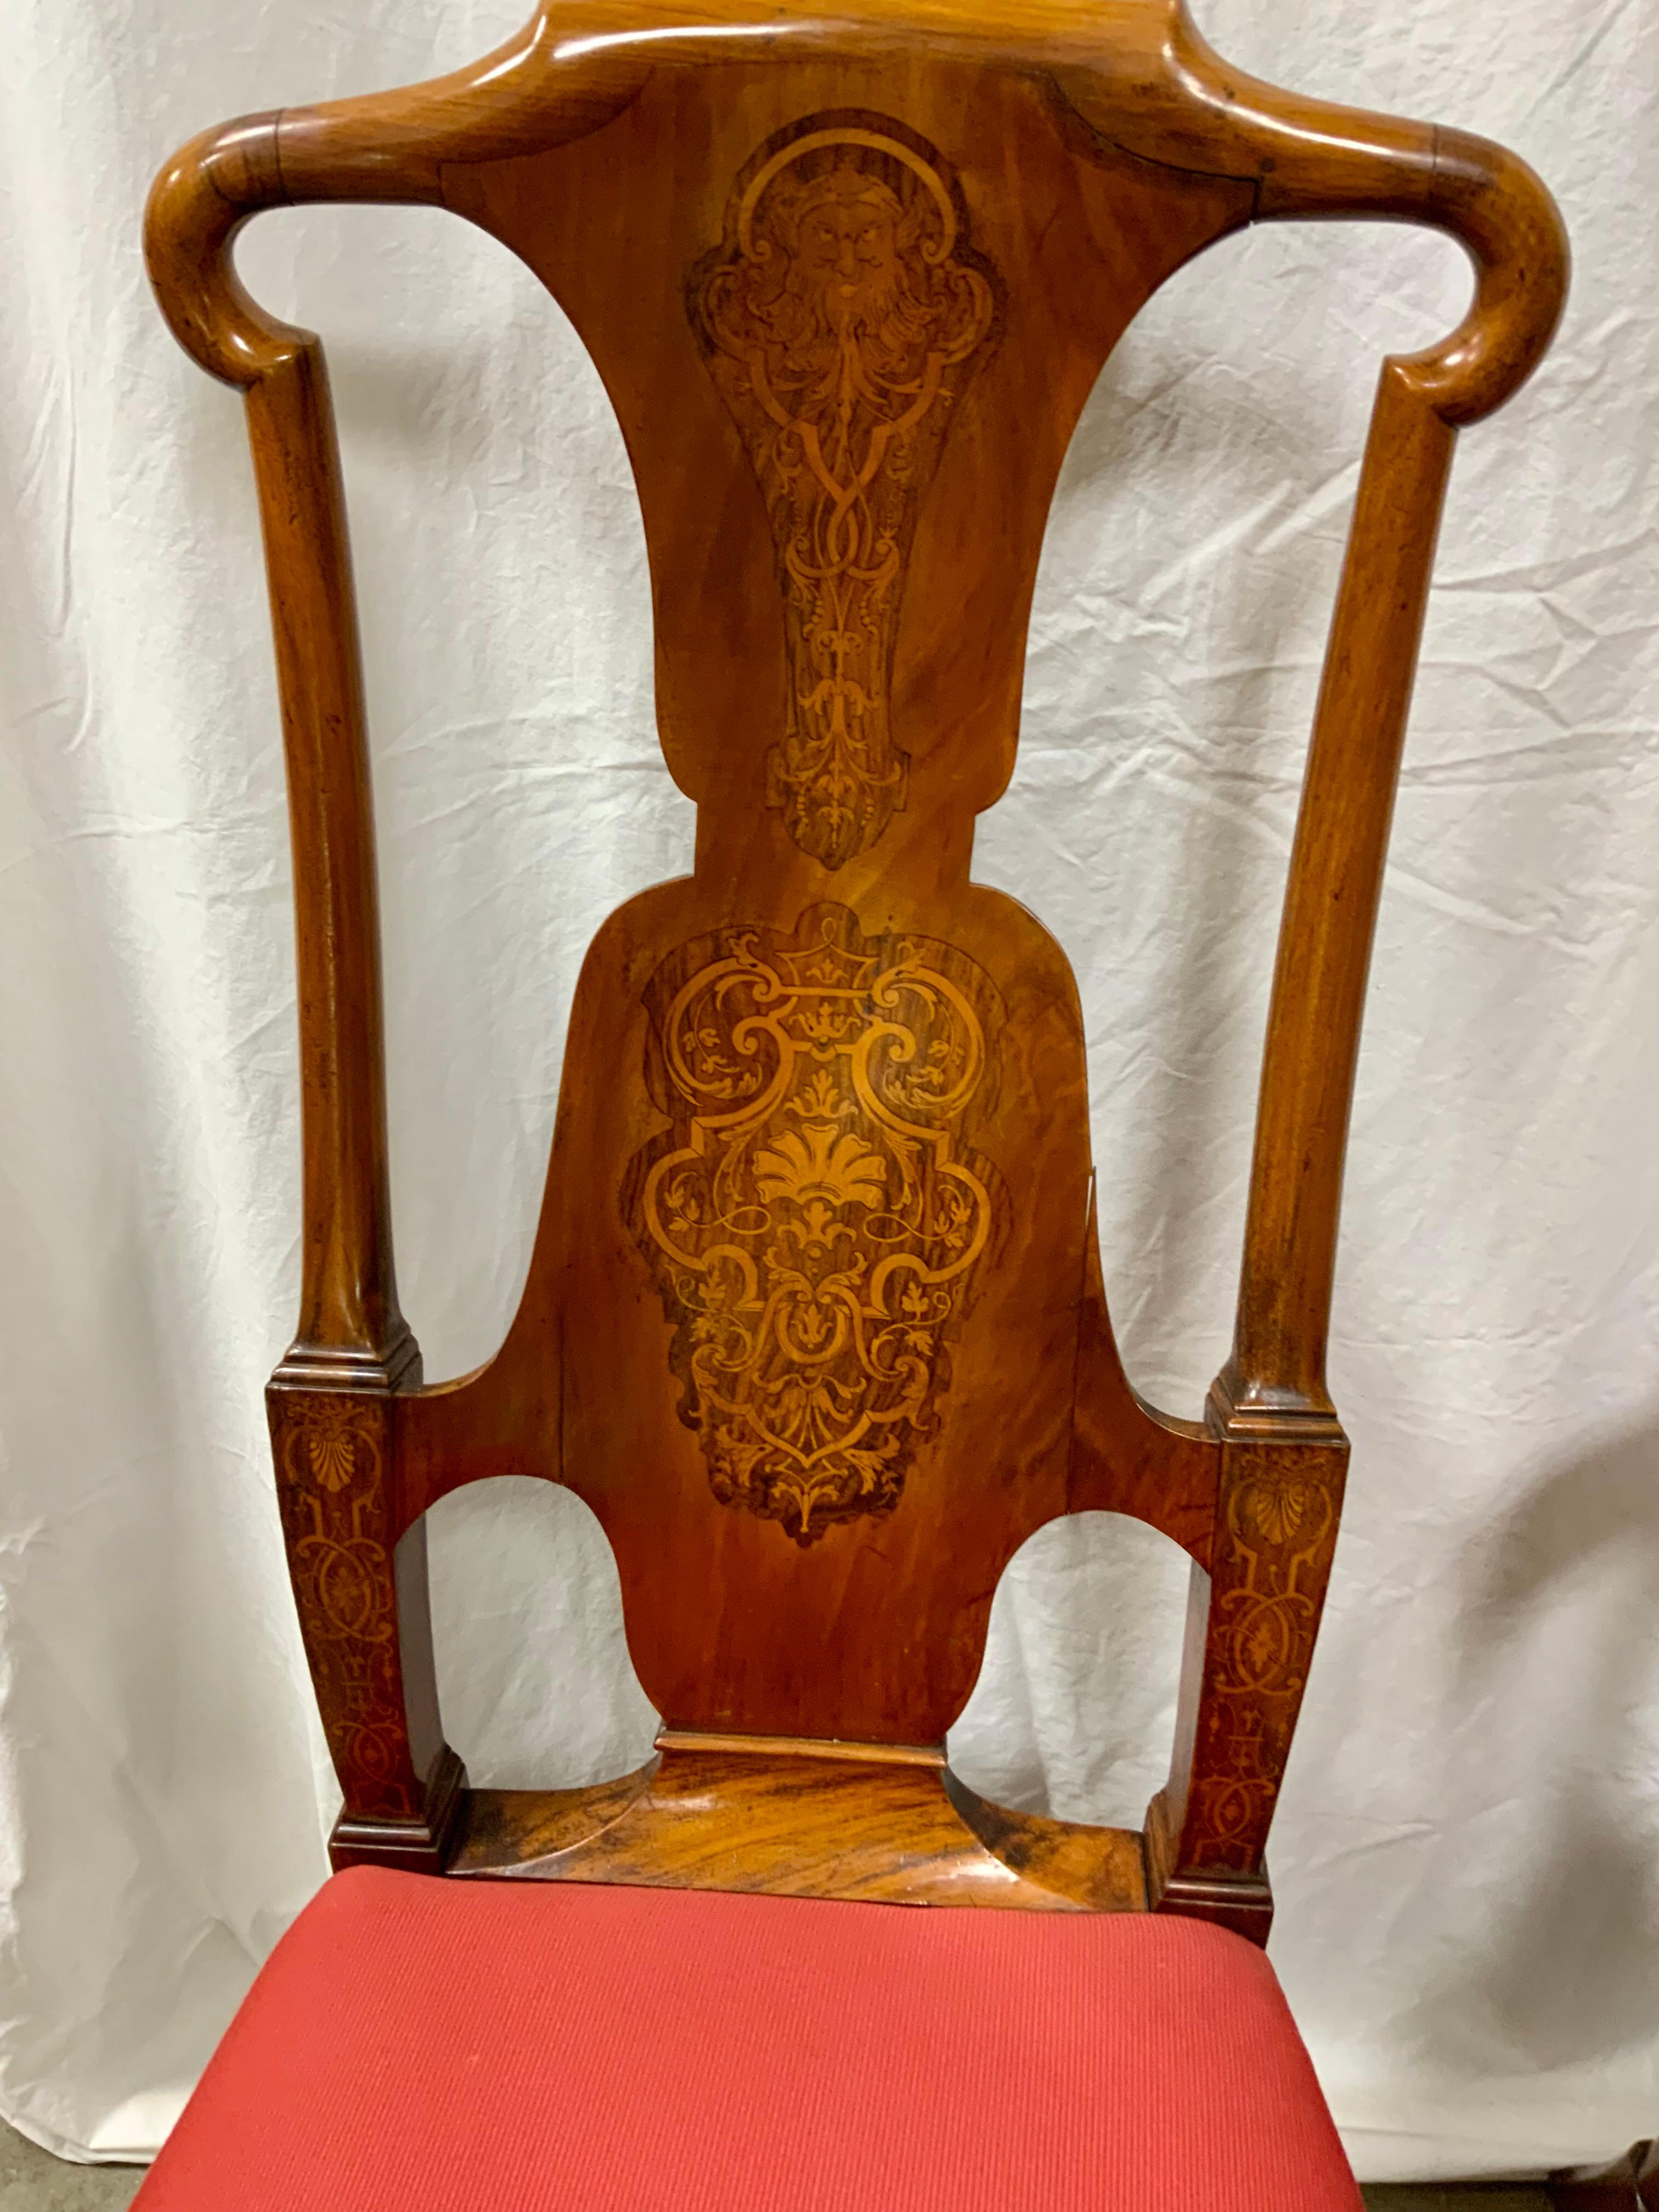 Set of 10 English dining chairs, 19 th c. Walnut with marquetry inlay In Excellent Condition For Sale In Houston, TX